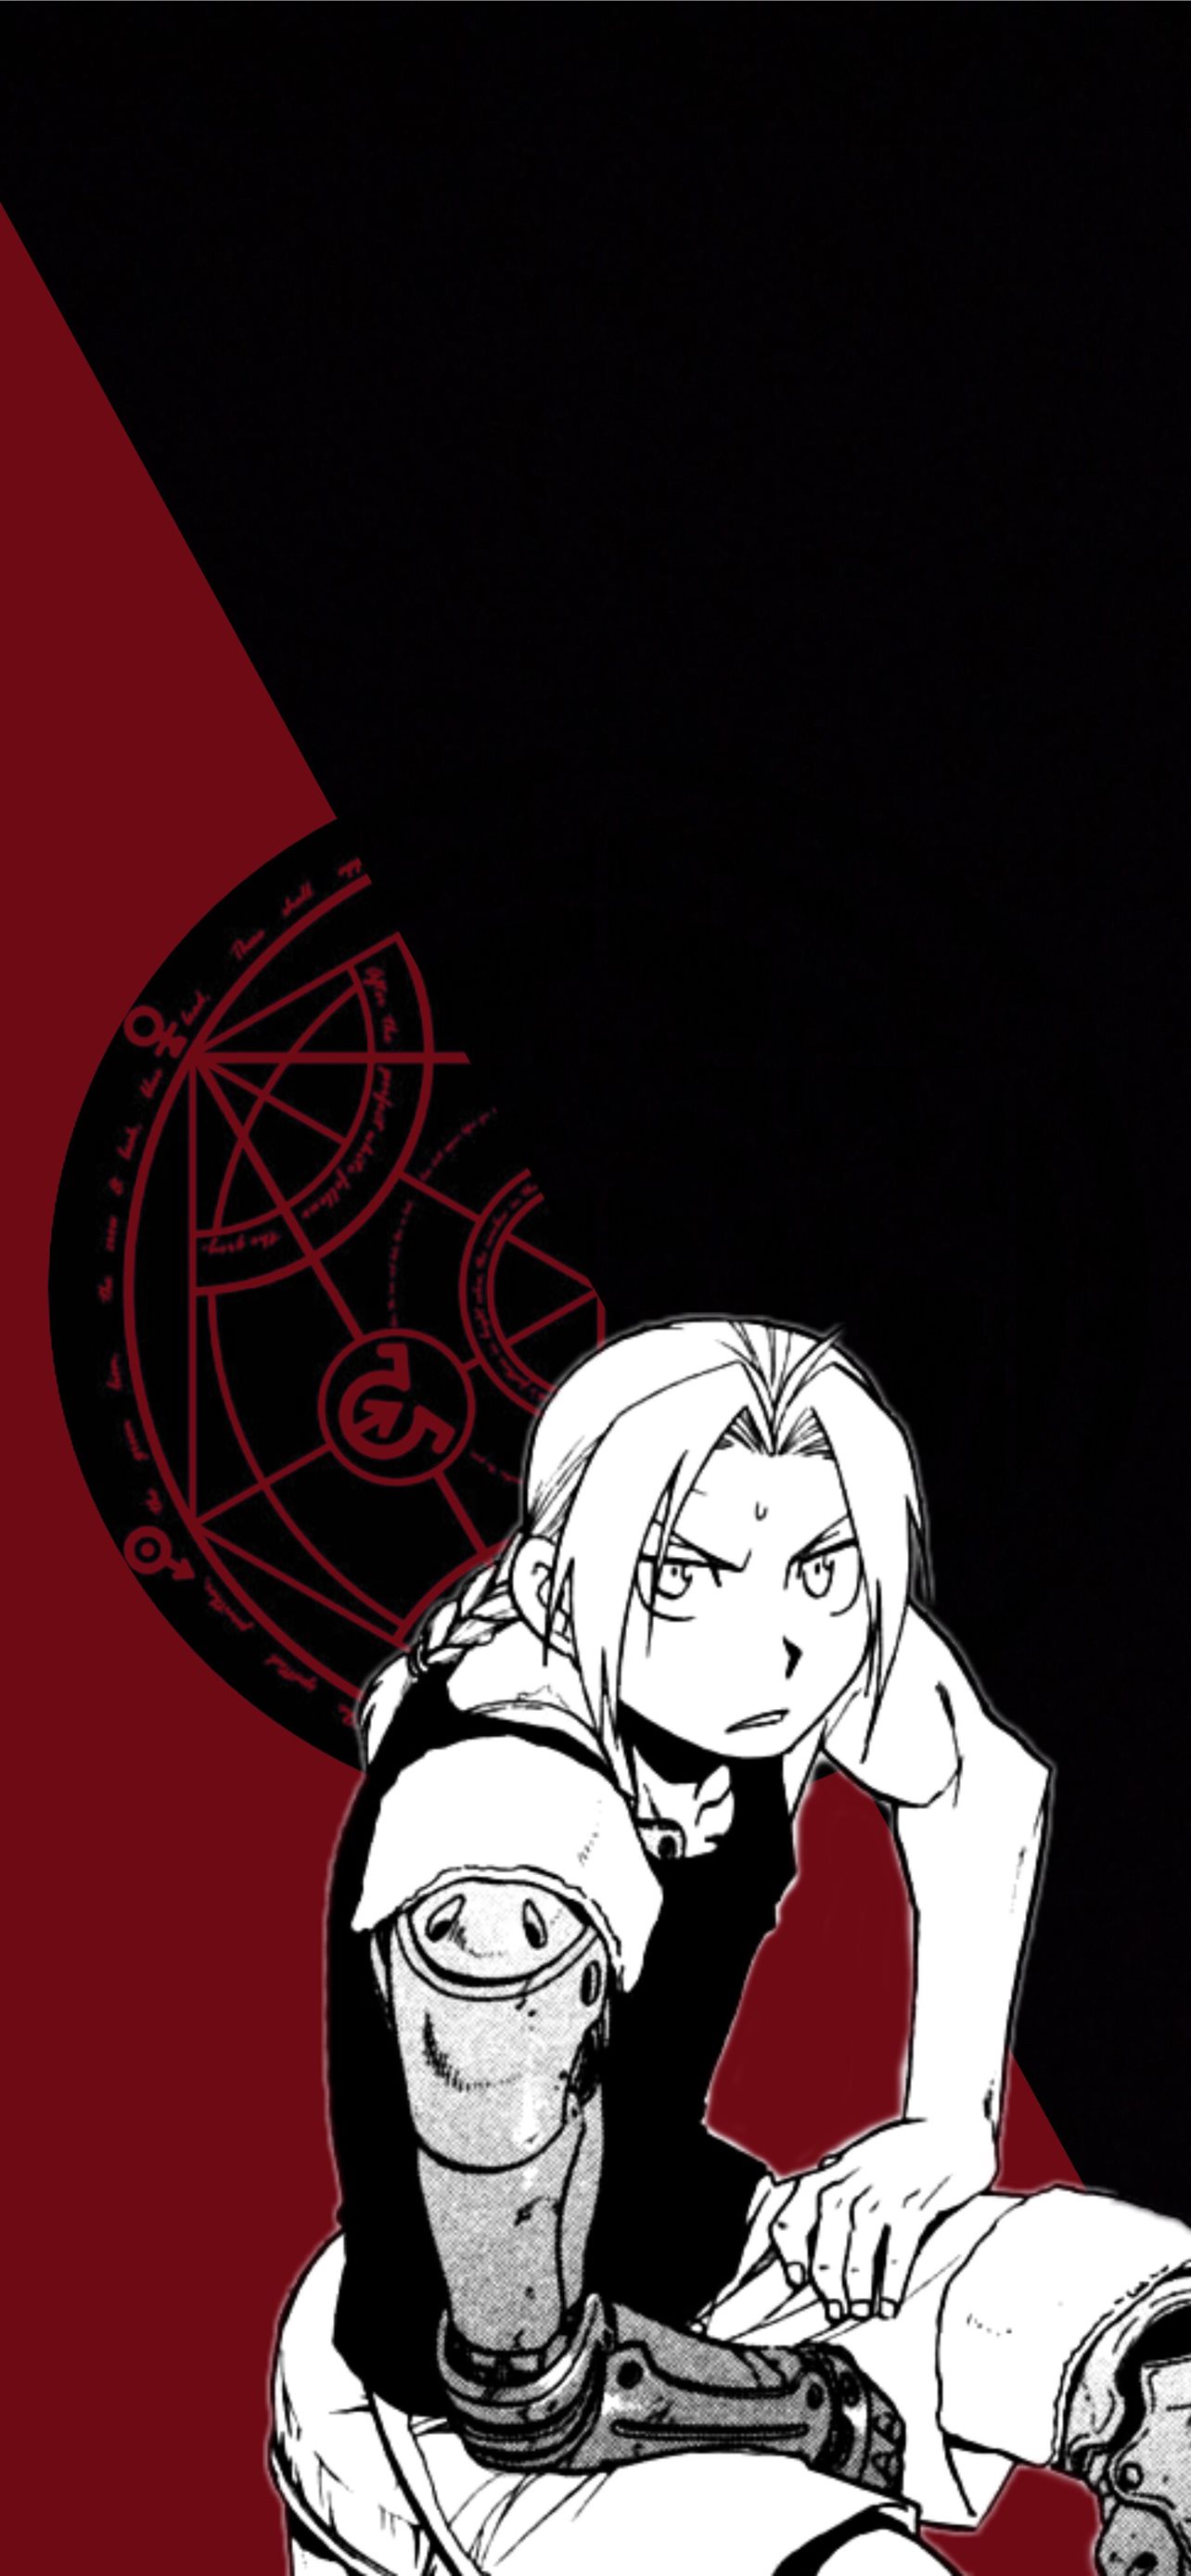 750 Anime FullMetal Alchemist HD Wallpapers and Backgrounds